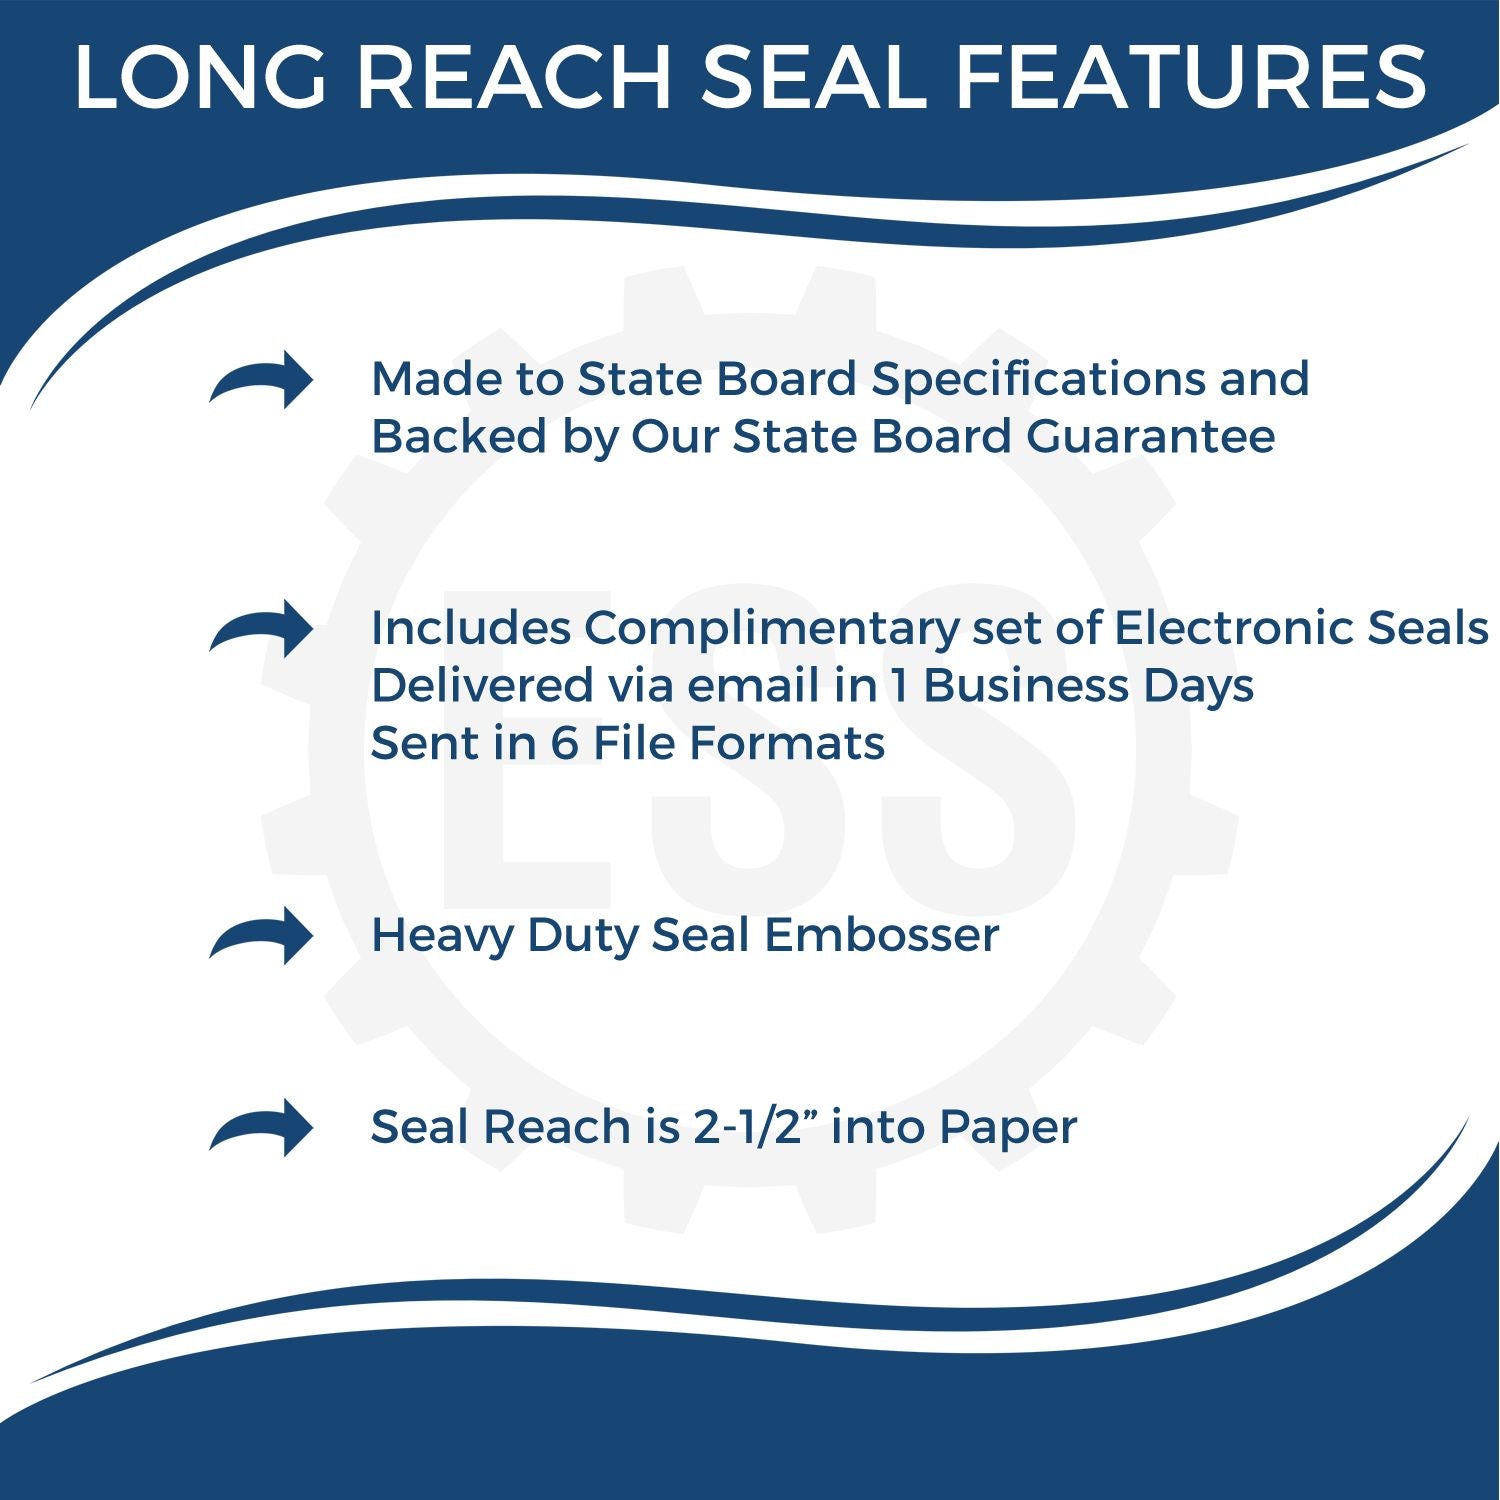 A picture of an infographic highlighting the selling points for the Long Reach New York Land Surveyor Seal